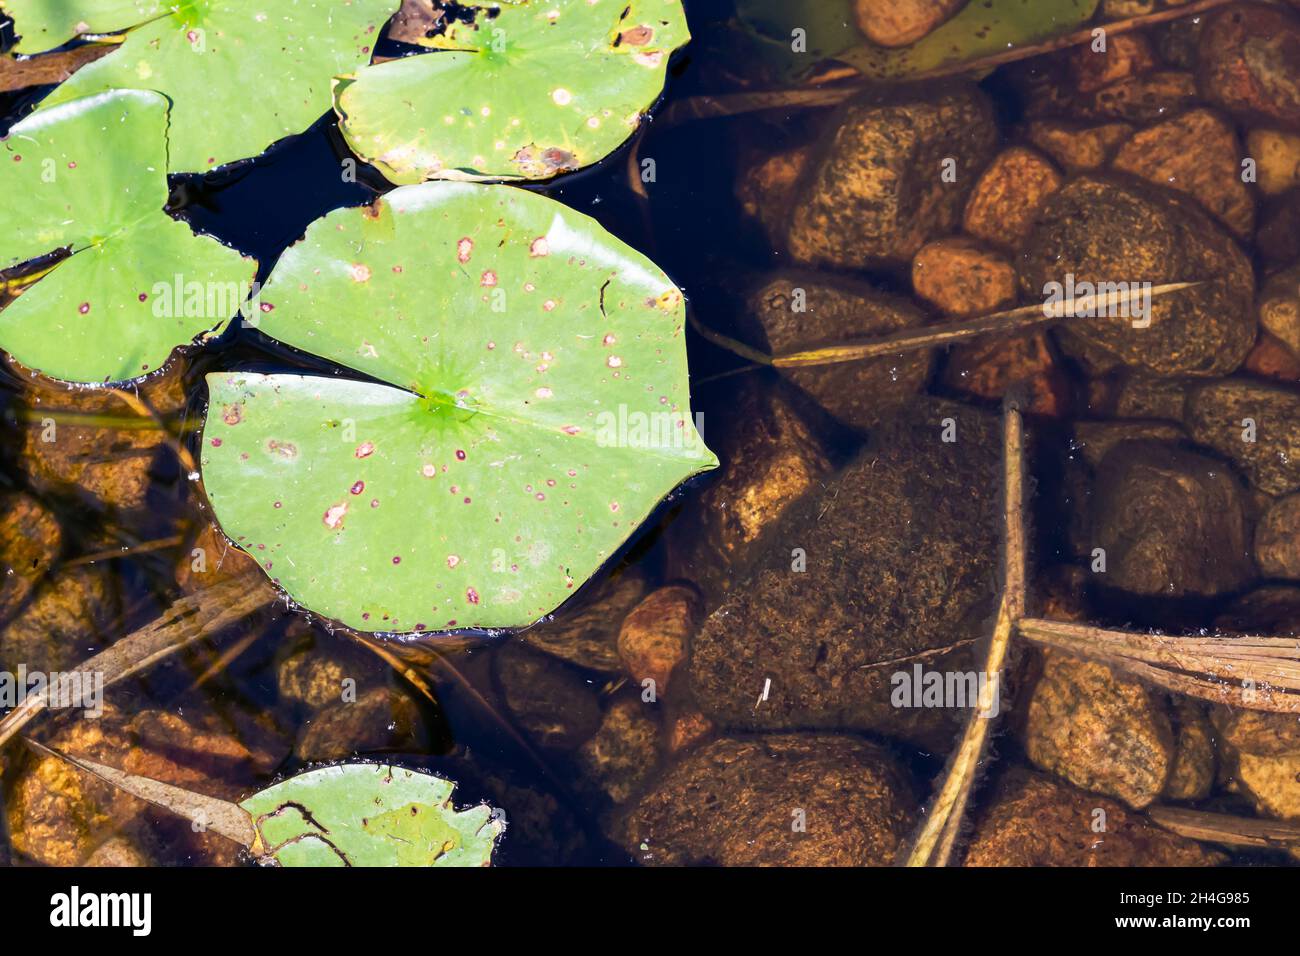 Close up of green lily pad - nymphaea -  under pond water with rocks and twigs. Stock Photo